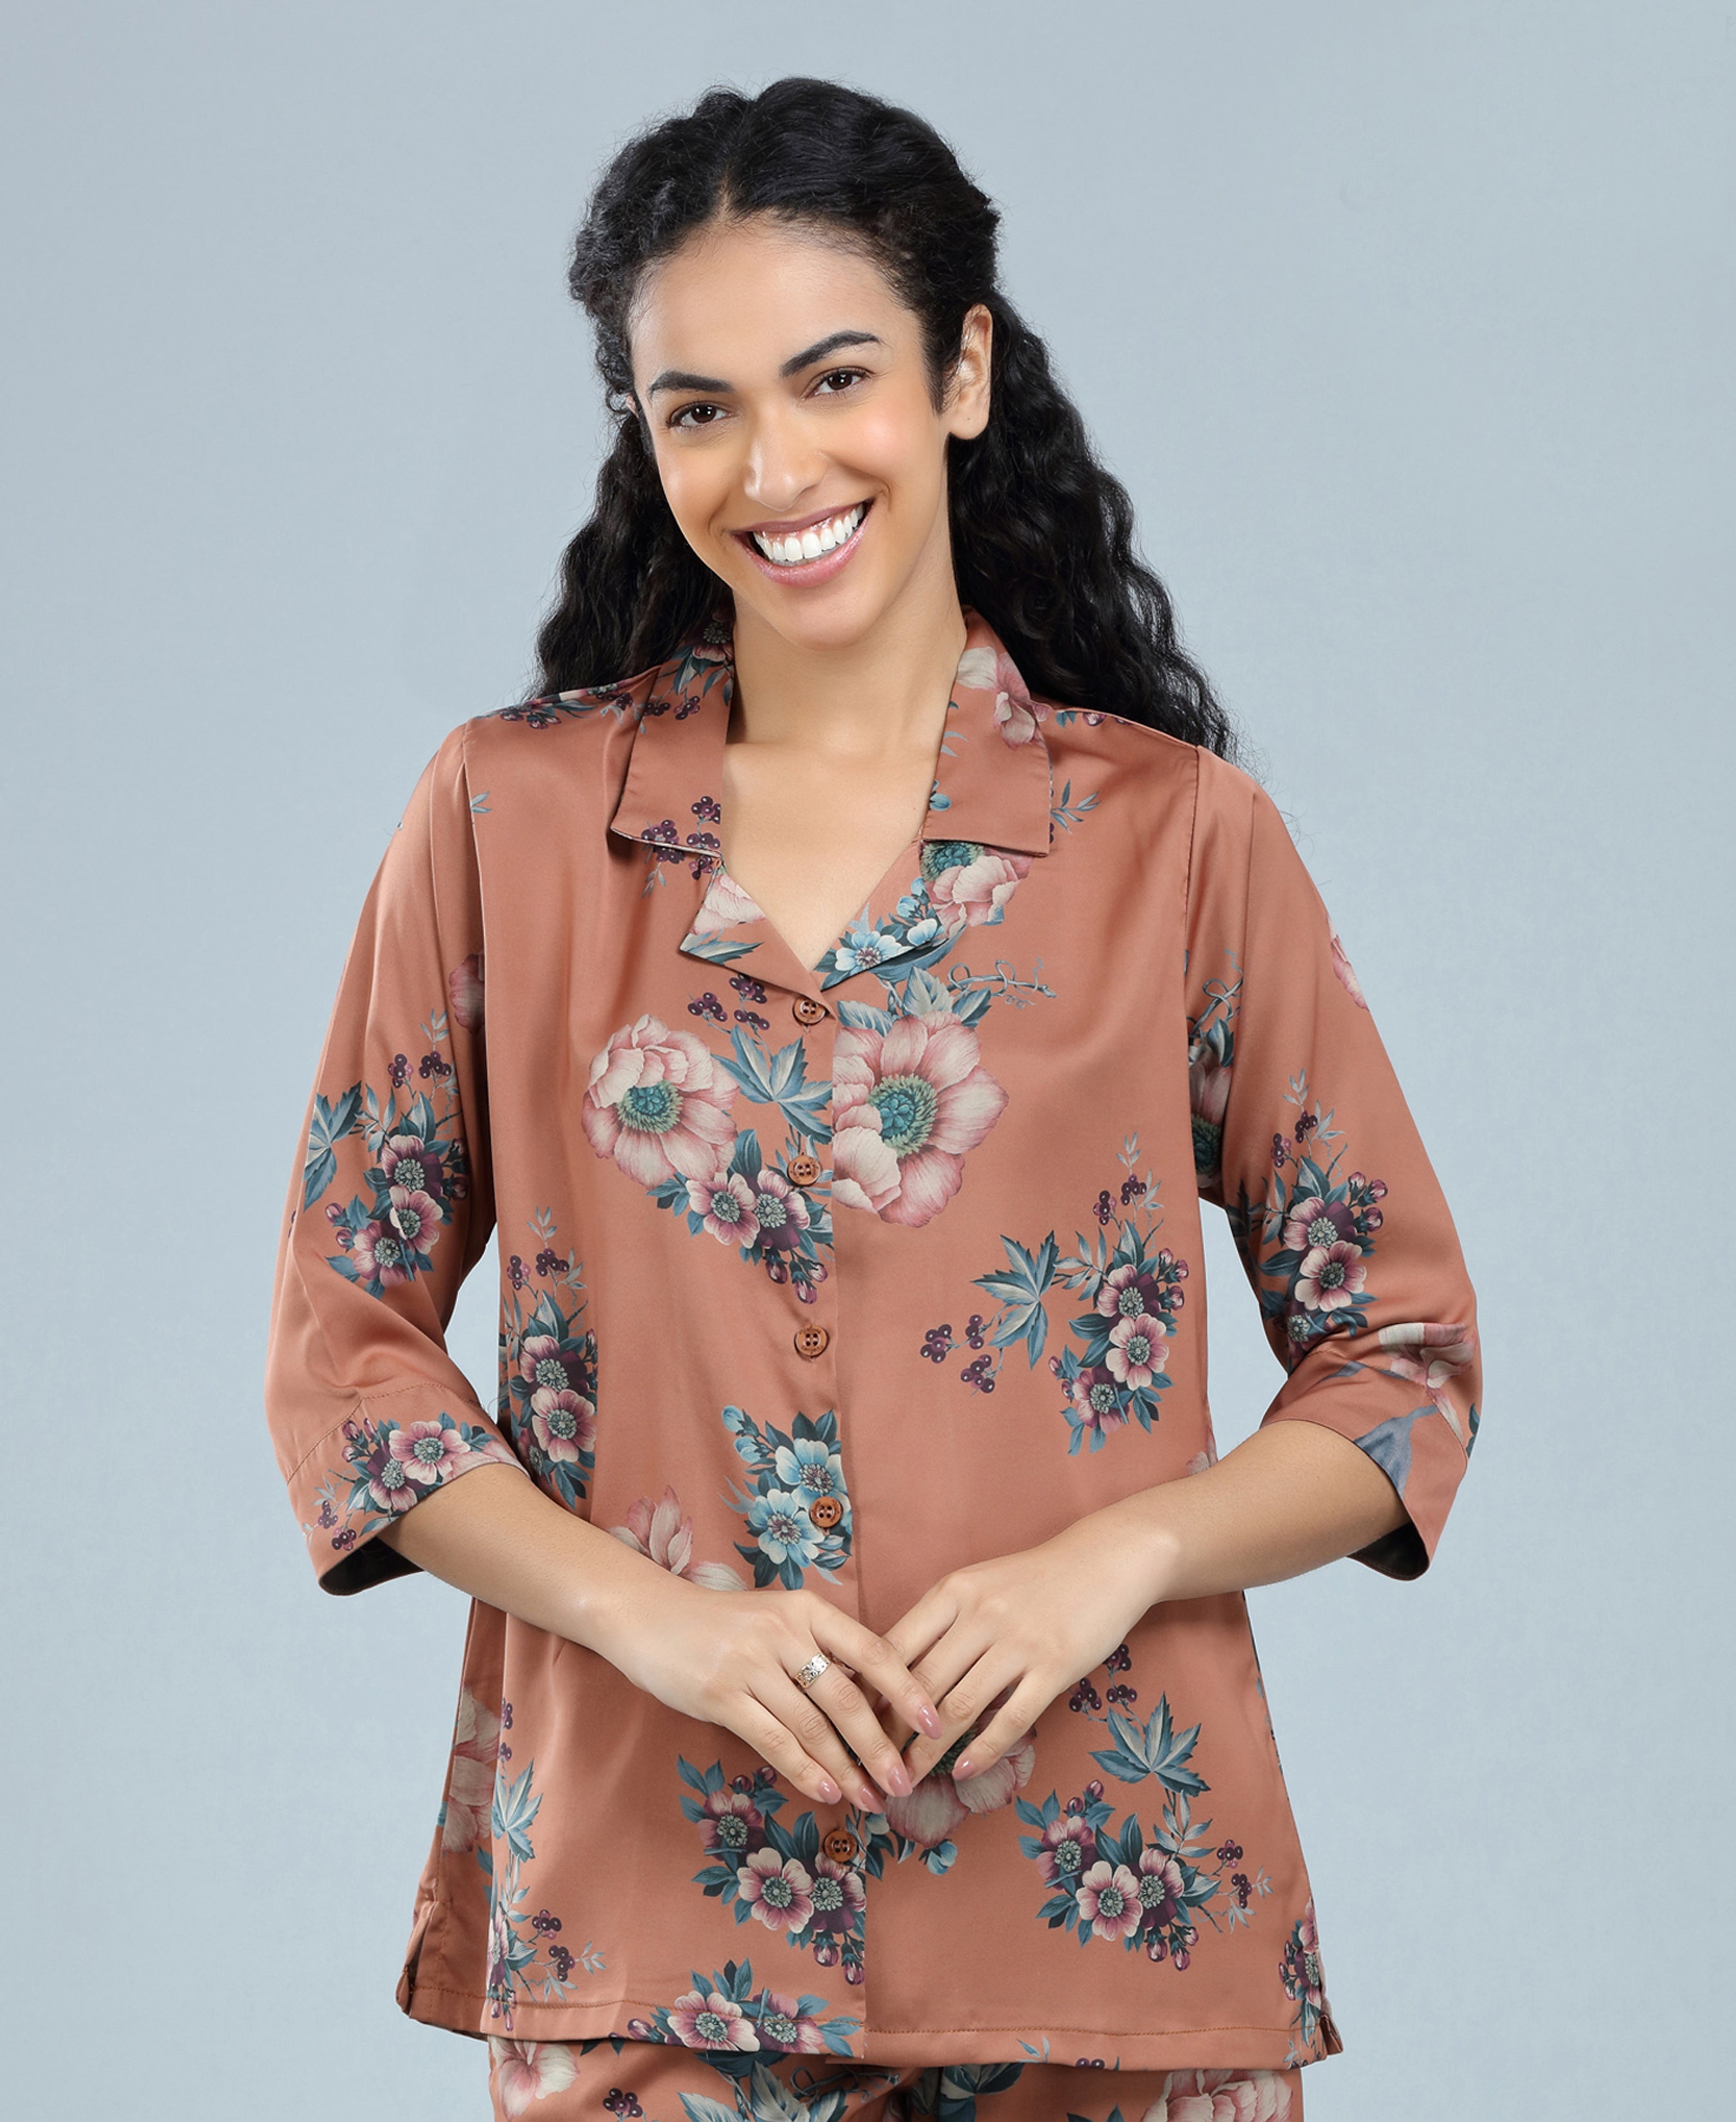 Velure Charming Relaxed Floral Print Night Suit